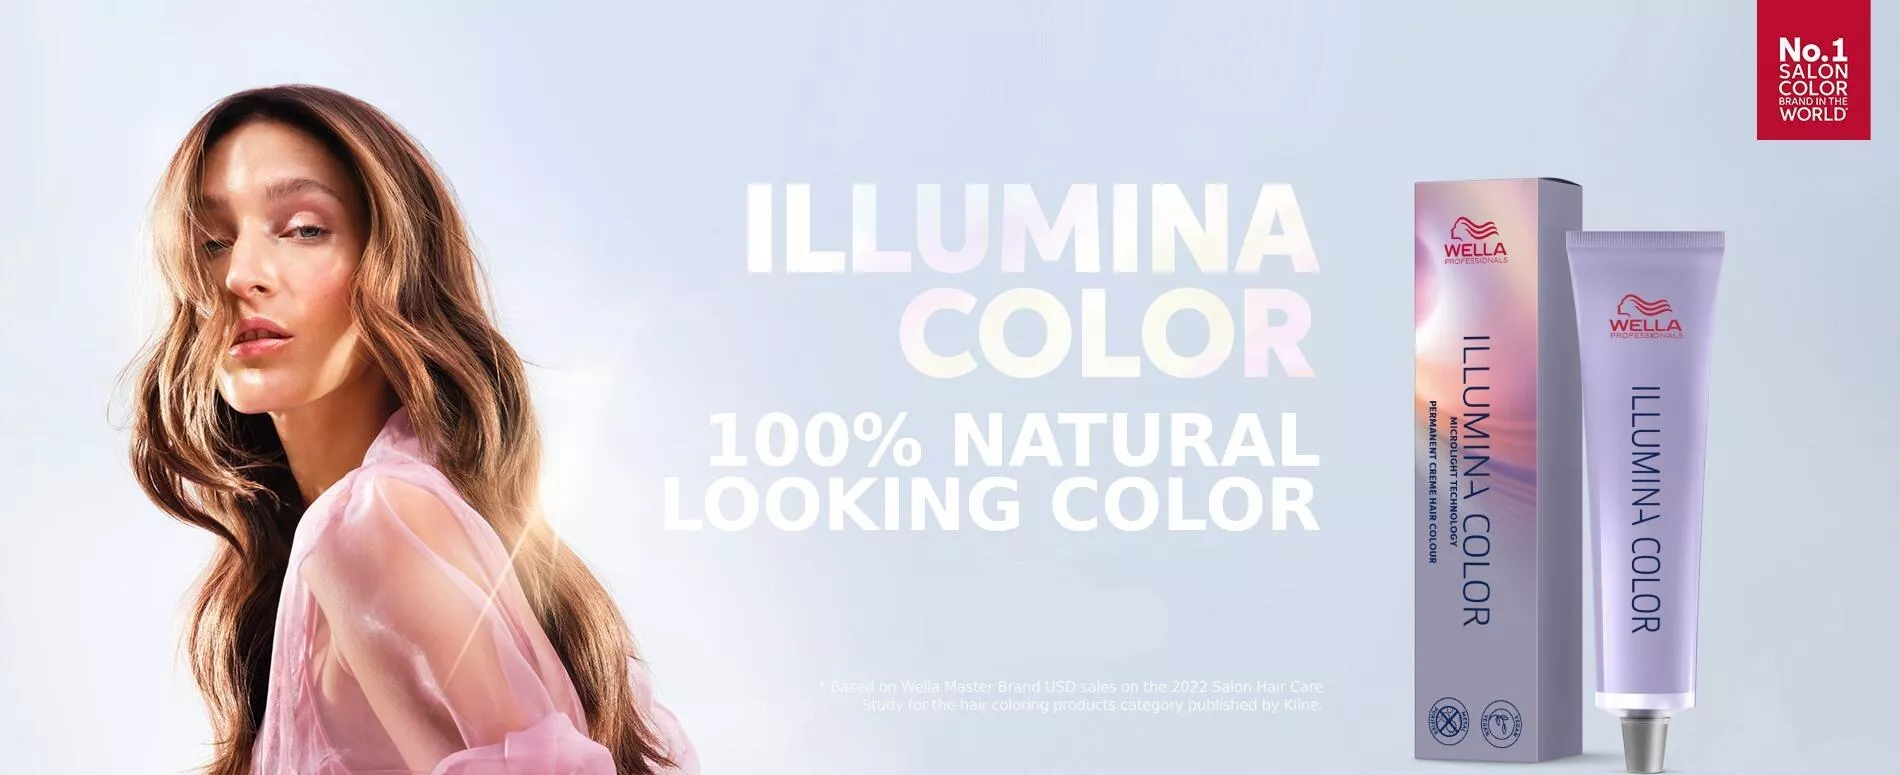 Illumina color banner with new packaging and new brunette model with 100% natural looking colour